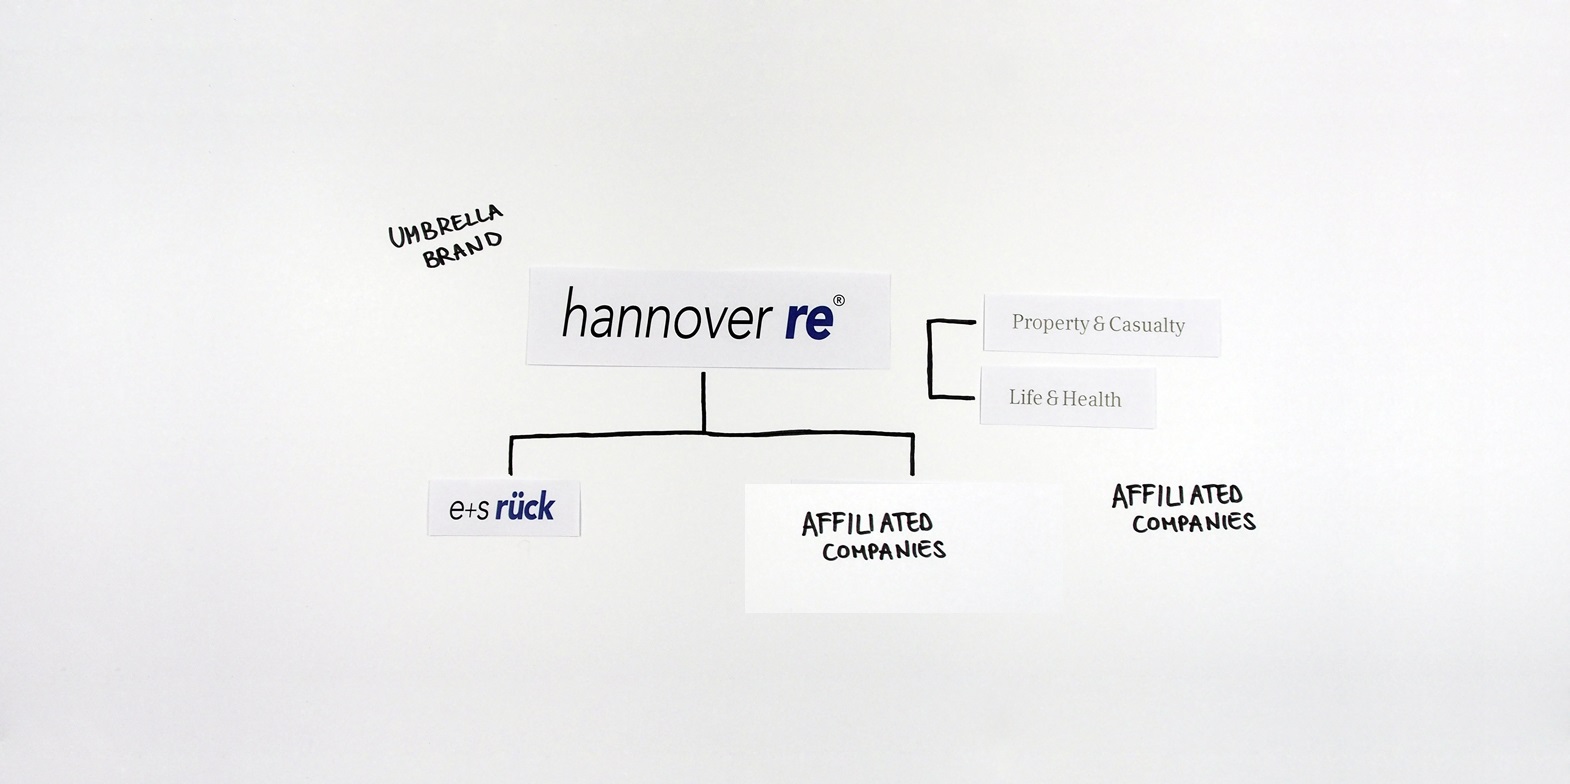 Hannover Re brand structure